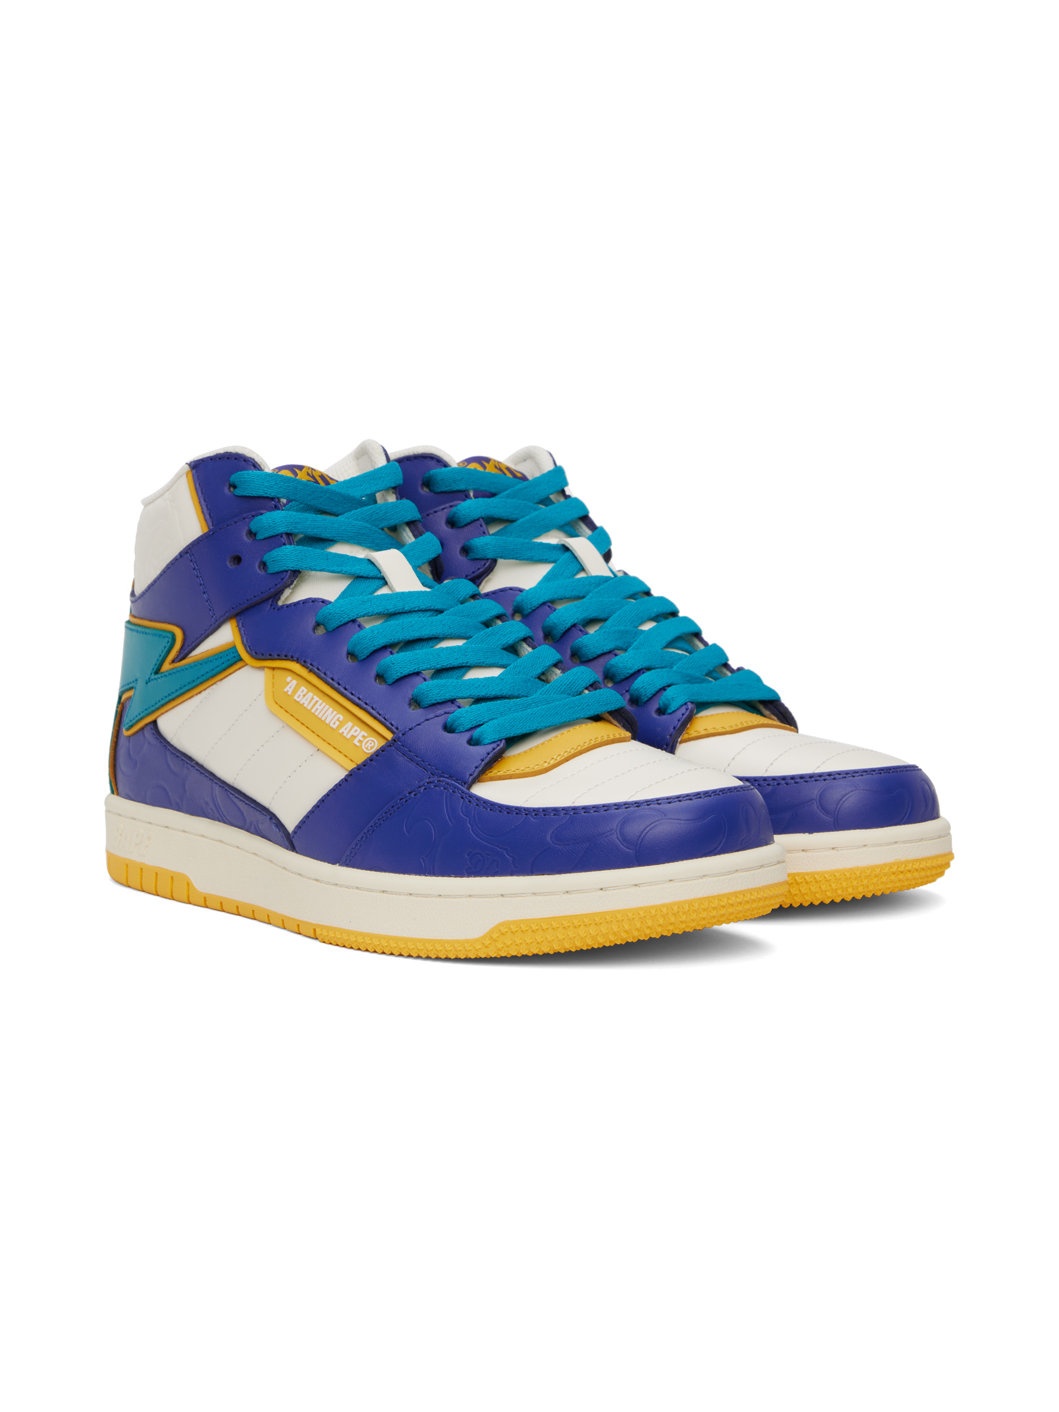 Blue & White STA 88 Mid #1 M1 Sneakers - 4